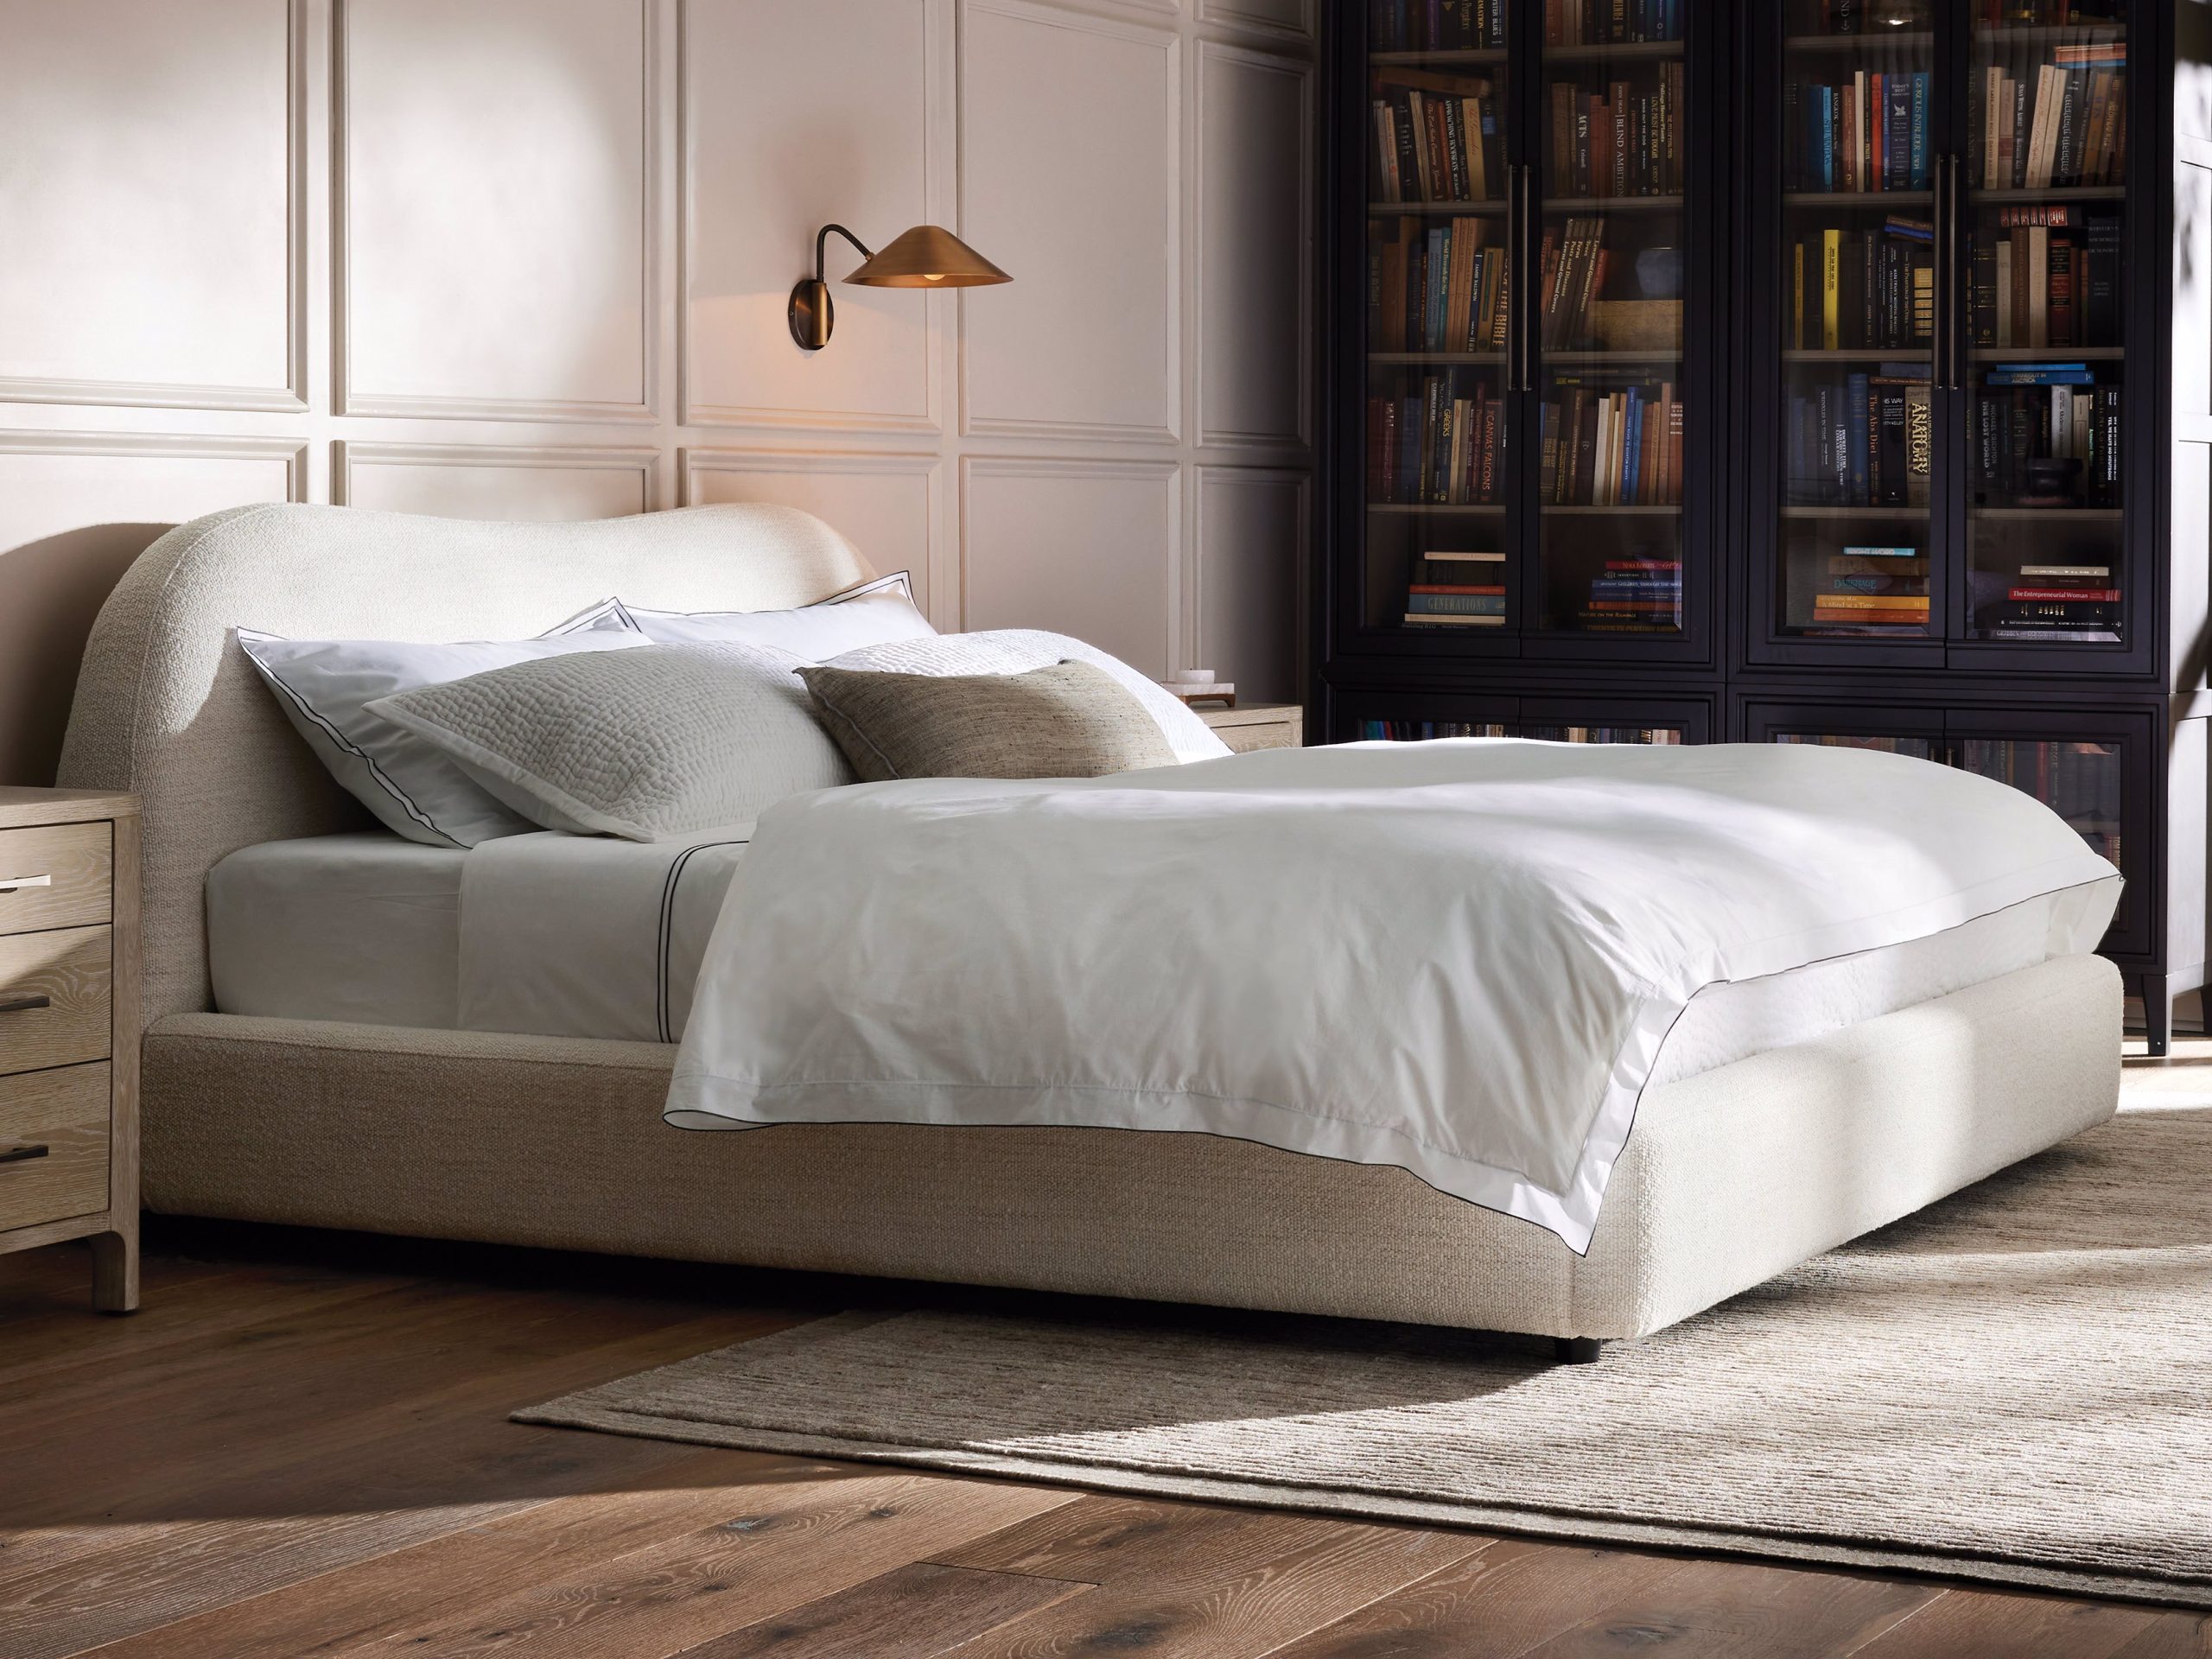 Are Arhaus Mattress Made without Chemicals